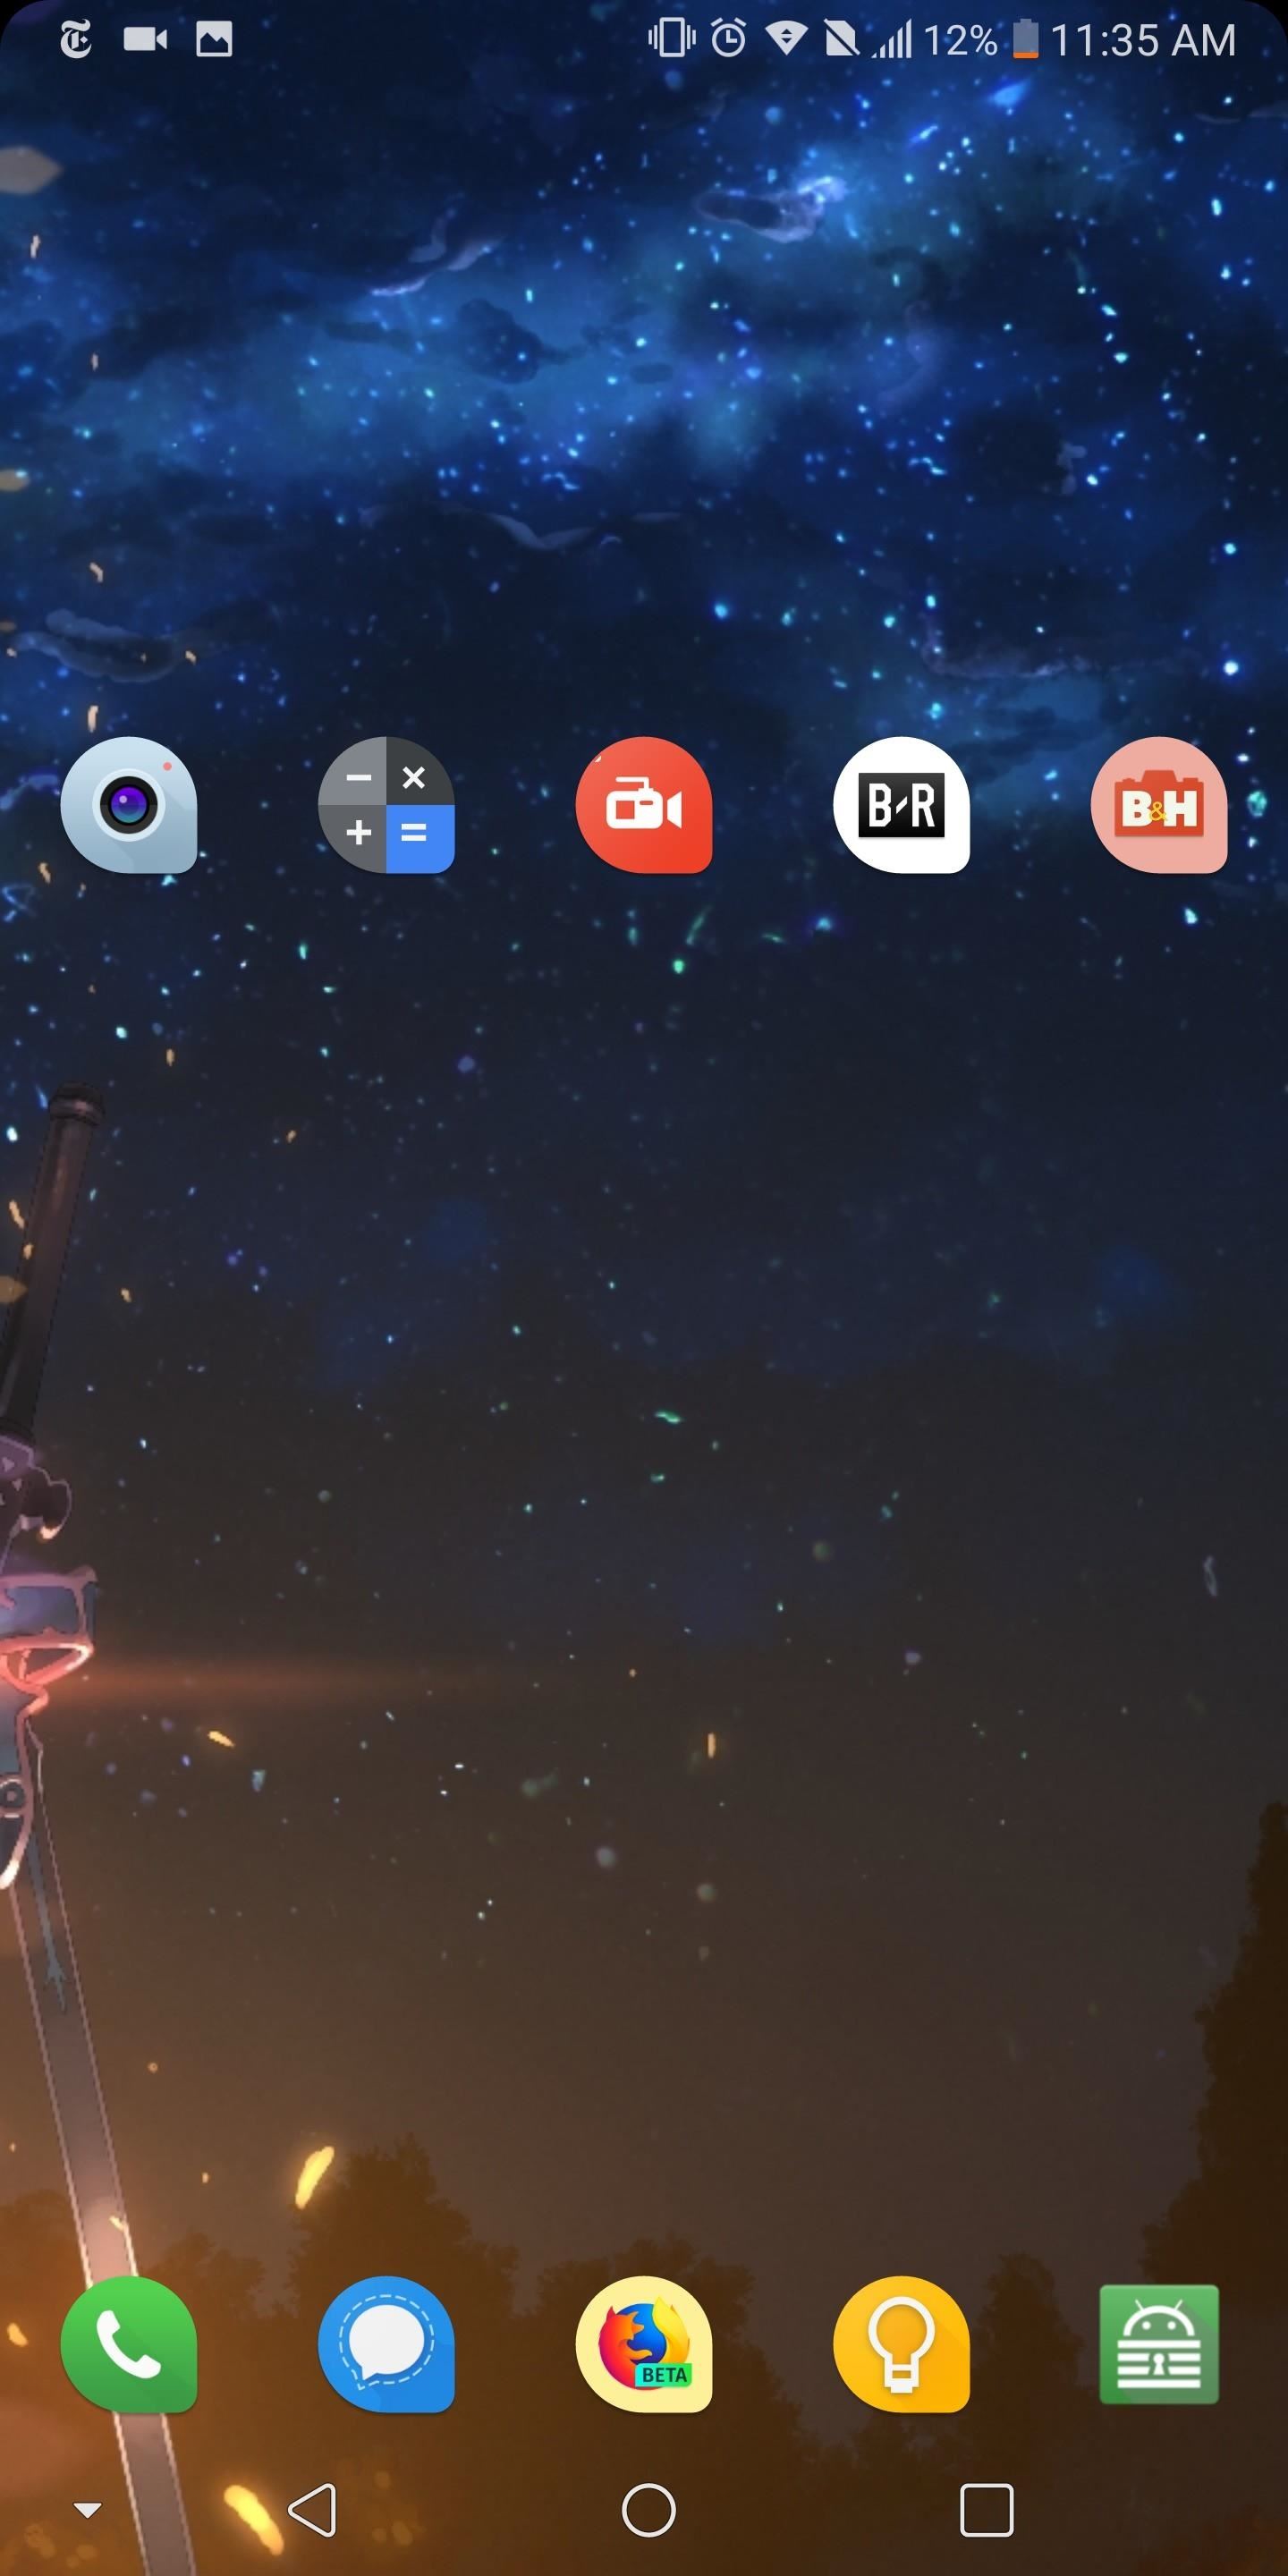 3 Easy Steps Clean Up Your Home Screen with Nova Launcher